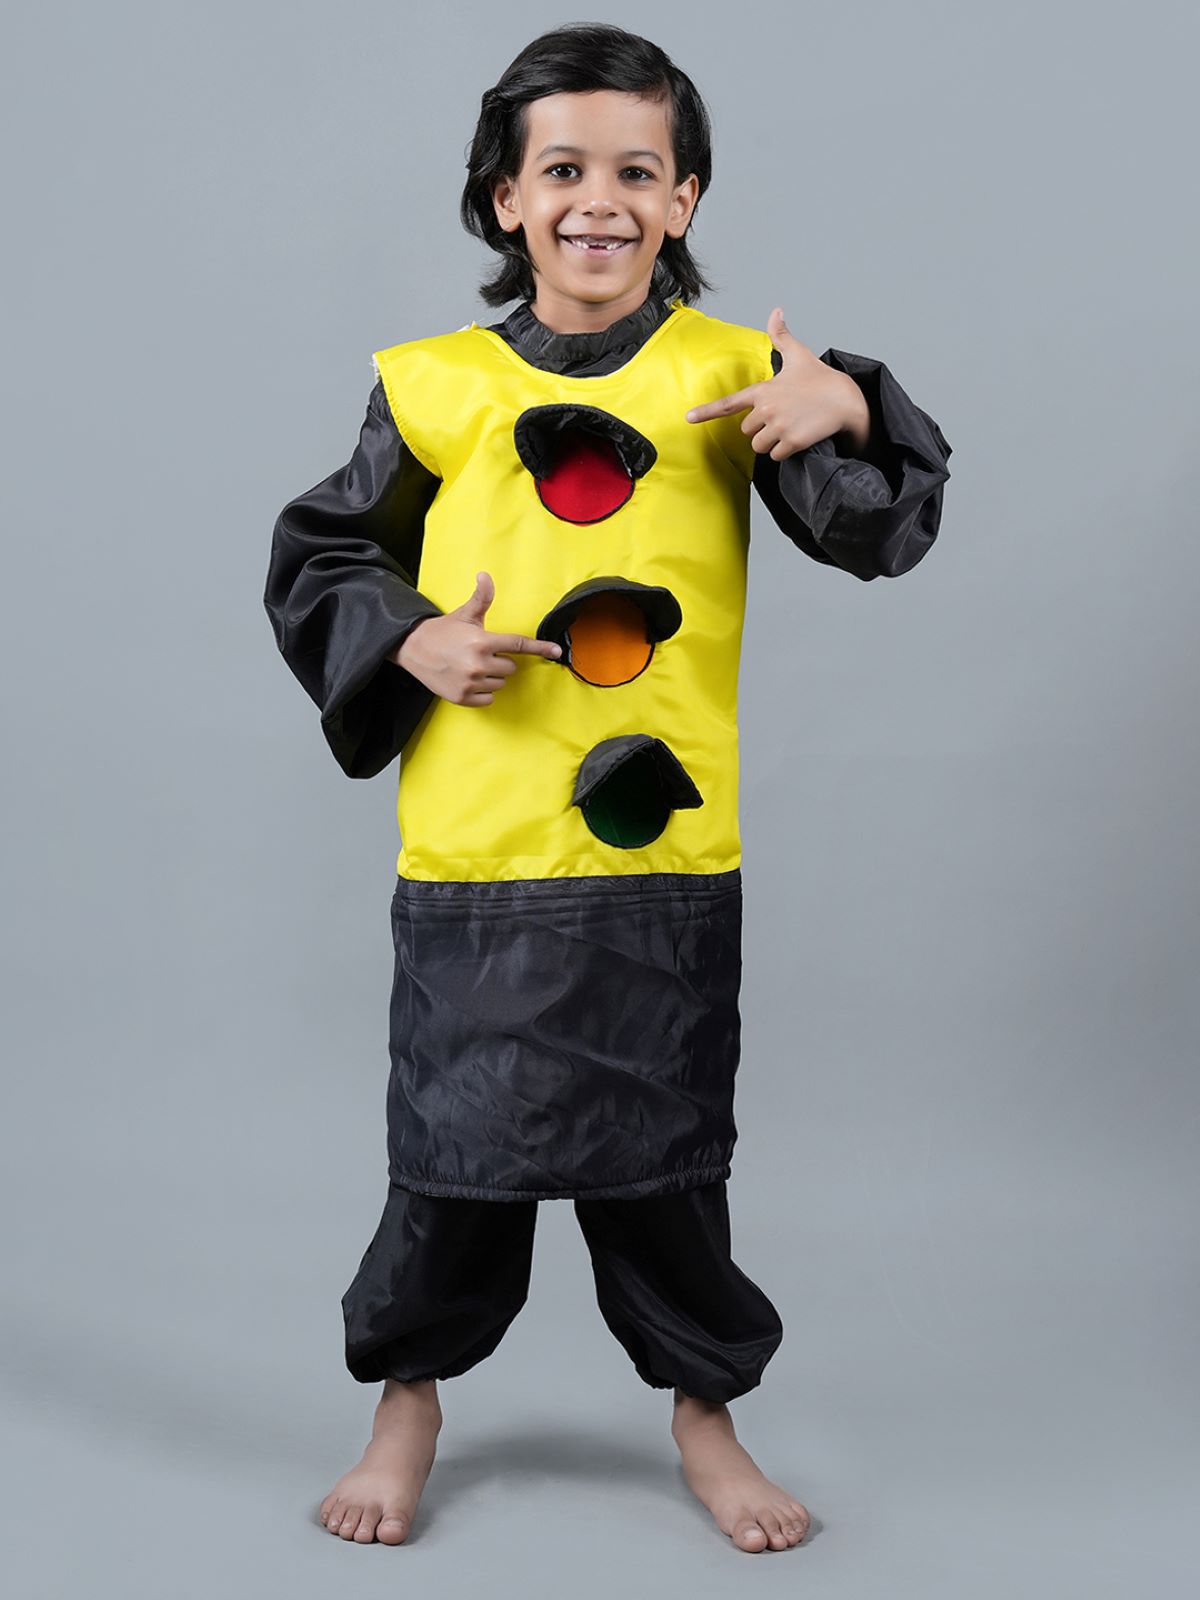 Traffic Lights Costume for Cosplay/Traffic Signal Costume/For Kids Annual  function/Theme Party/Competition/Stage Shows/Birthday Party Dress